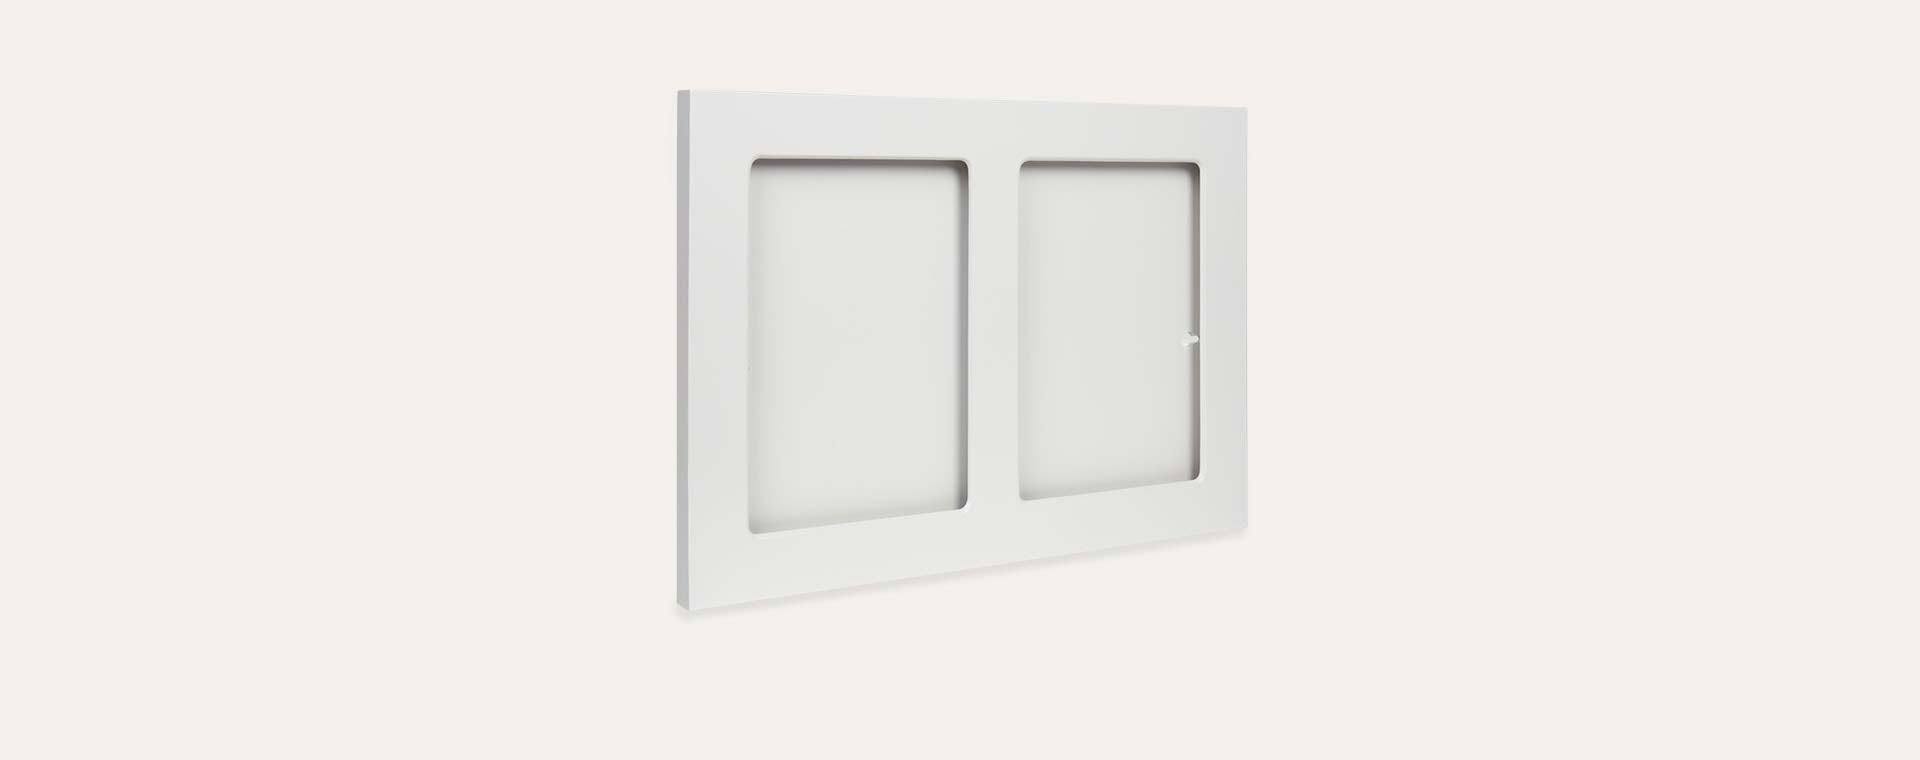 White The Articulate Gallery A4 Double Frame